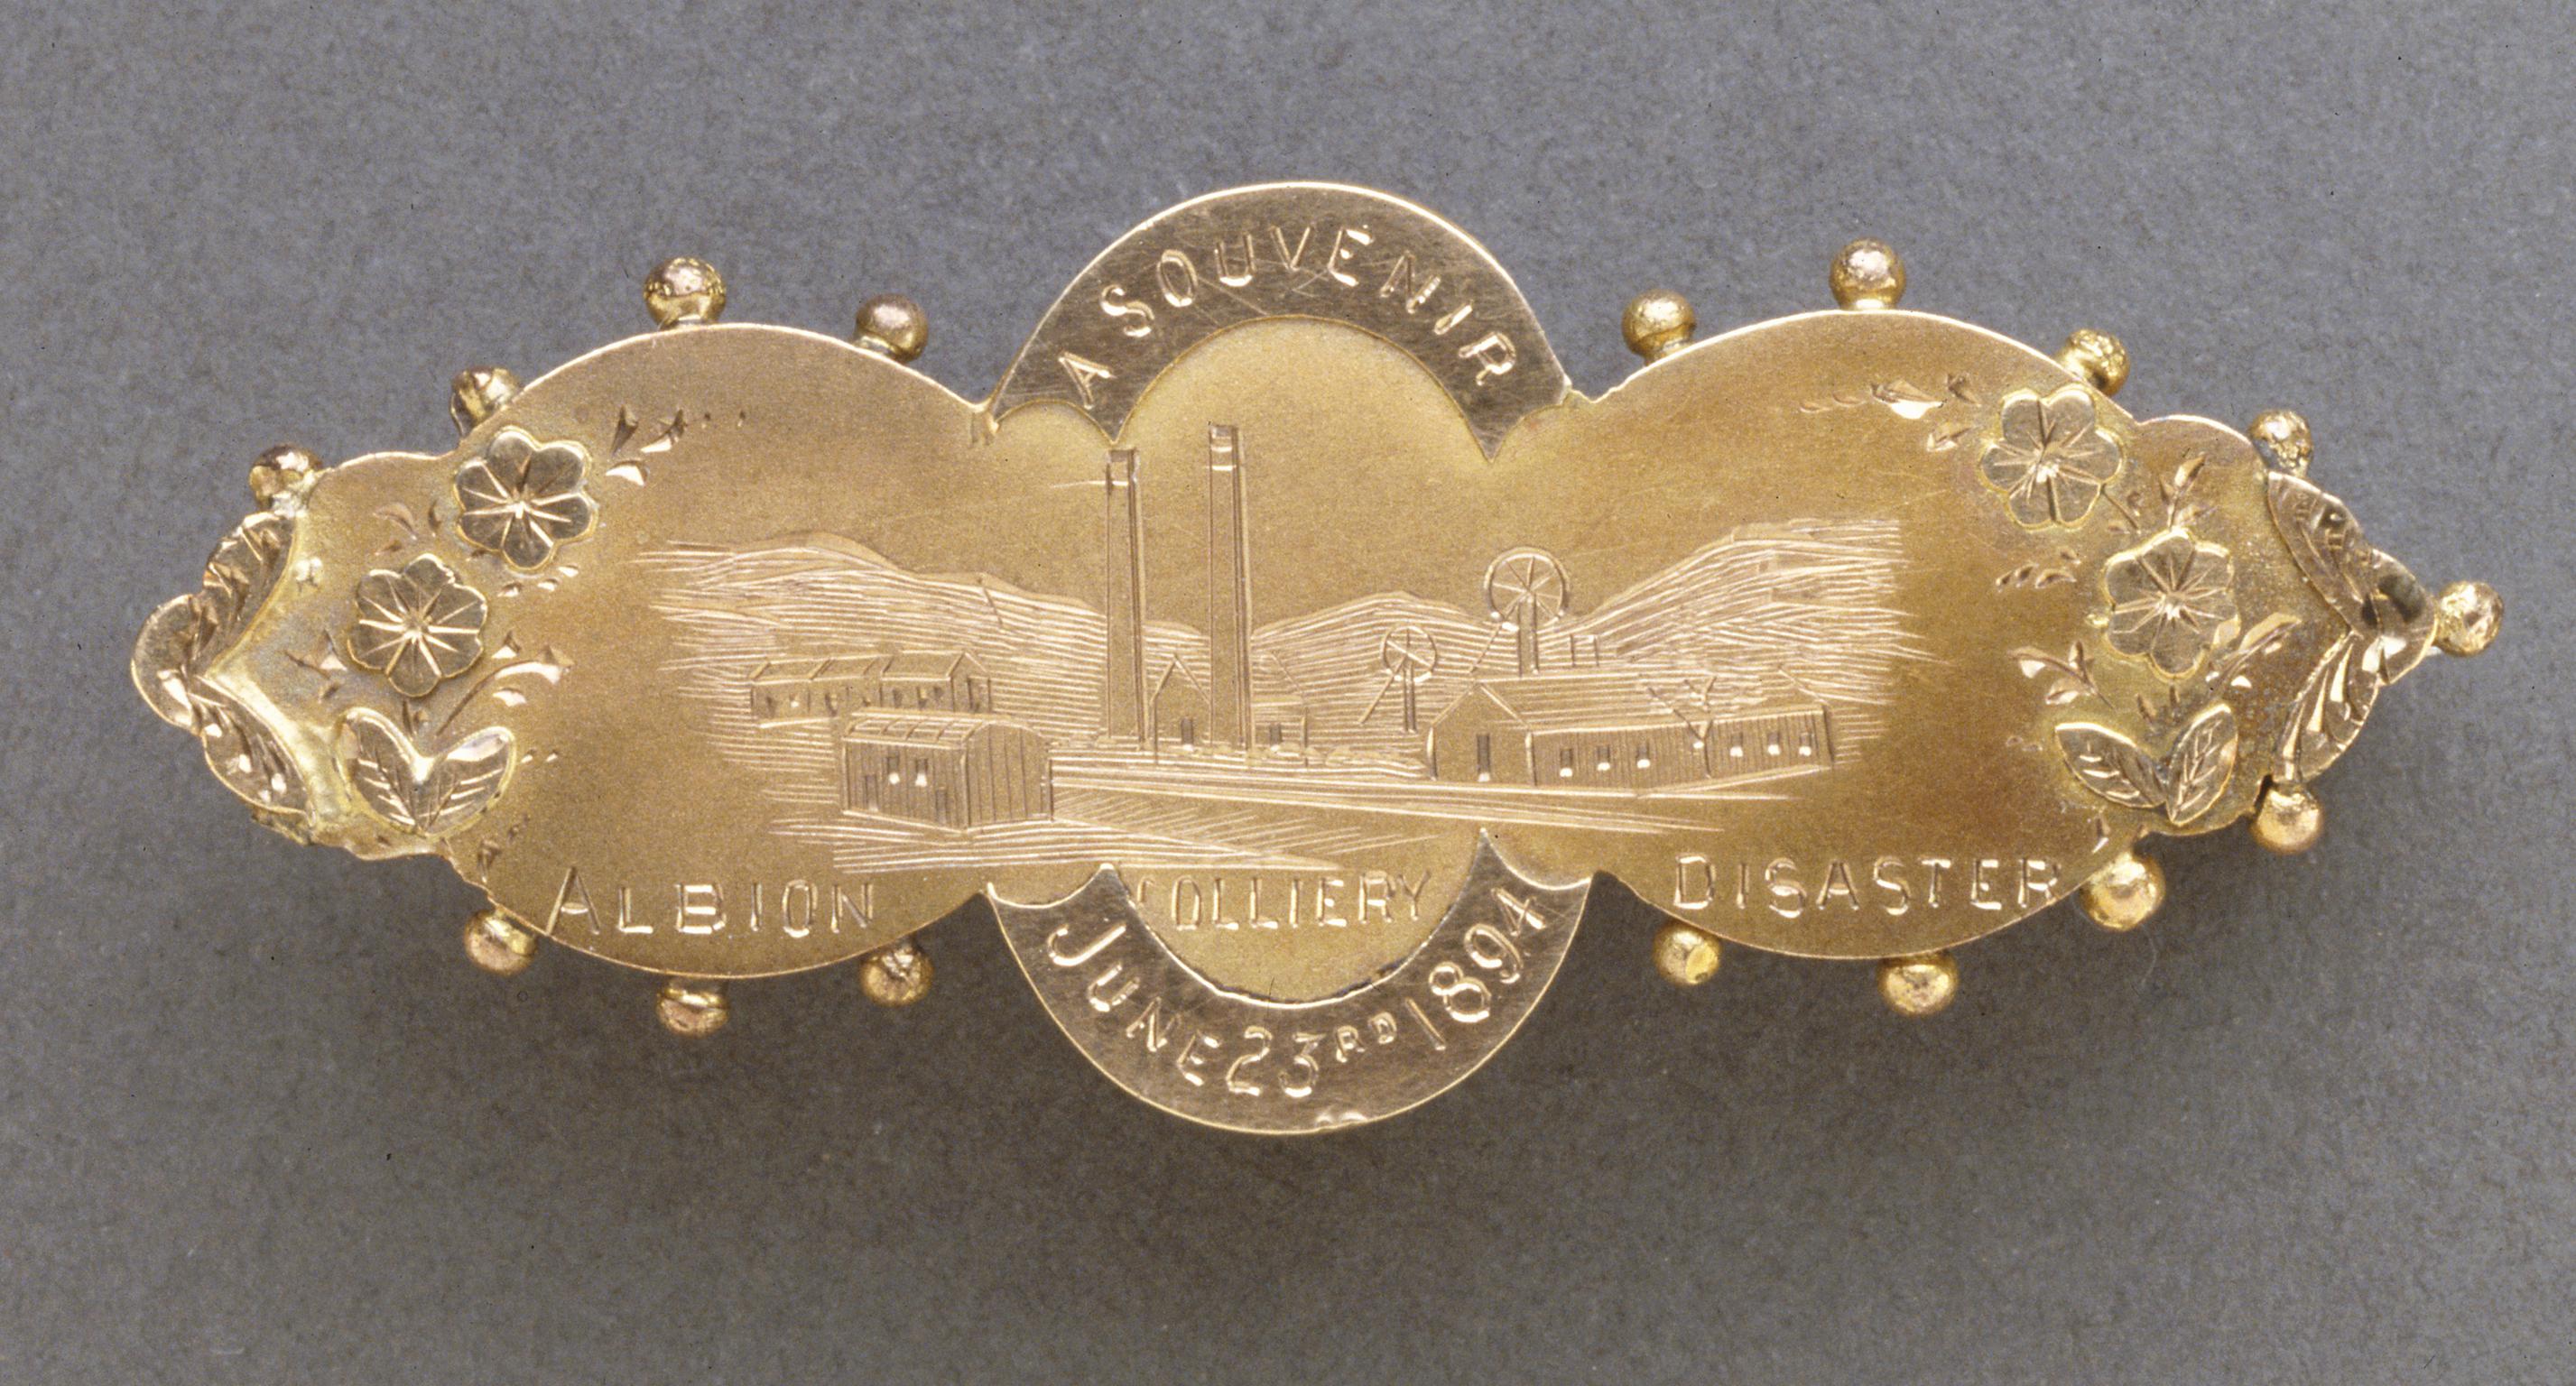 Albion Colliery disaster brooch, 1894